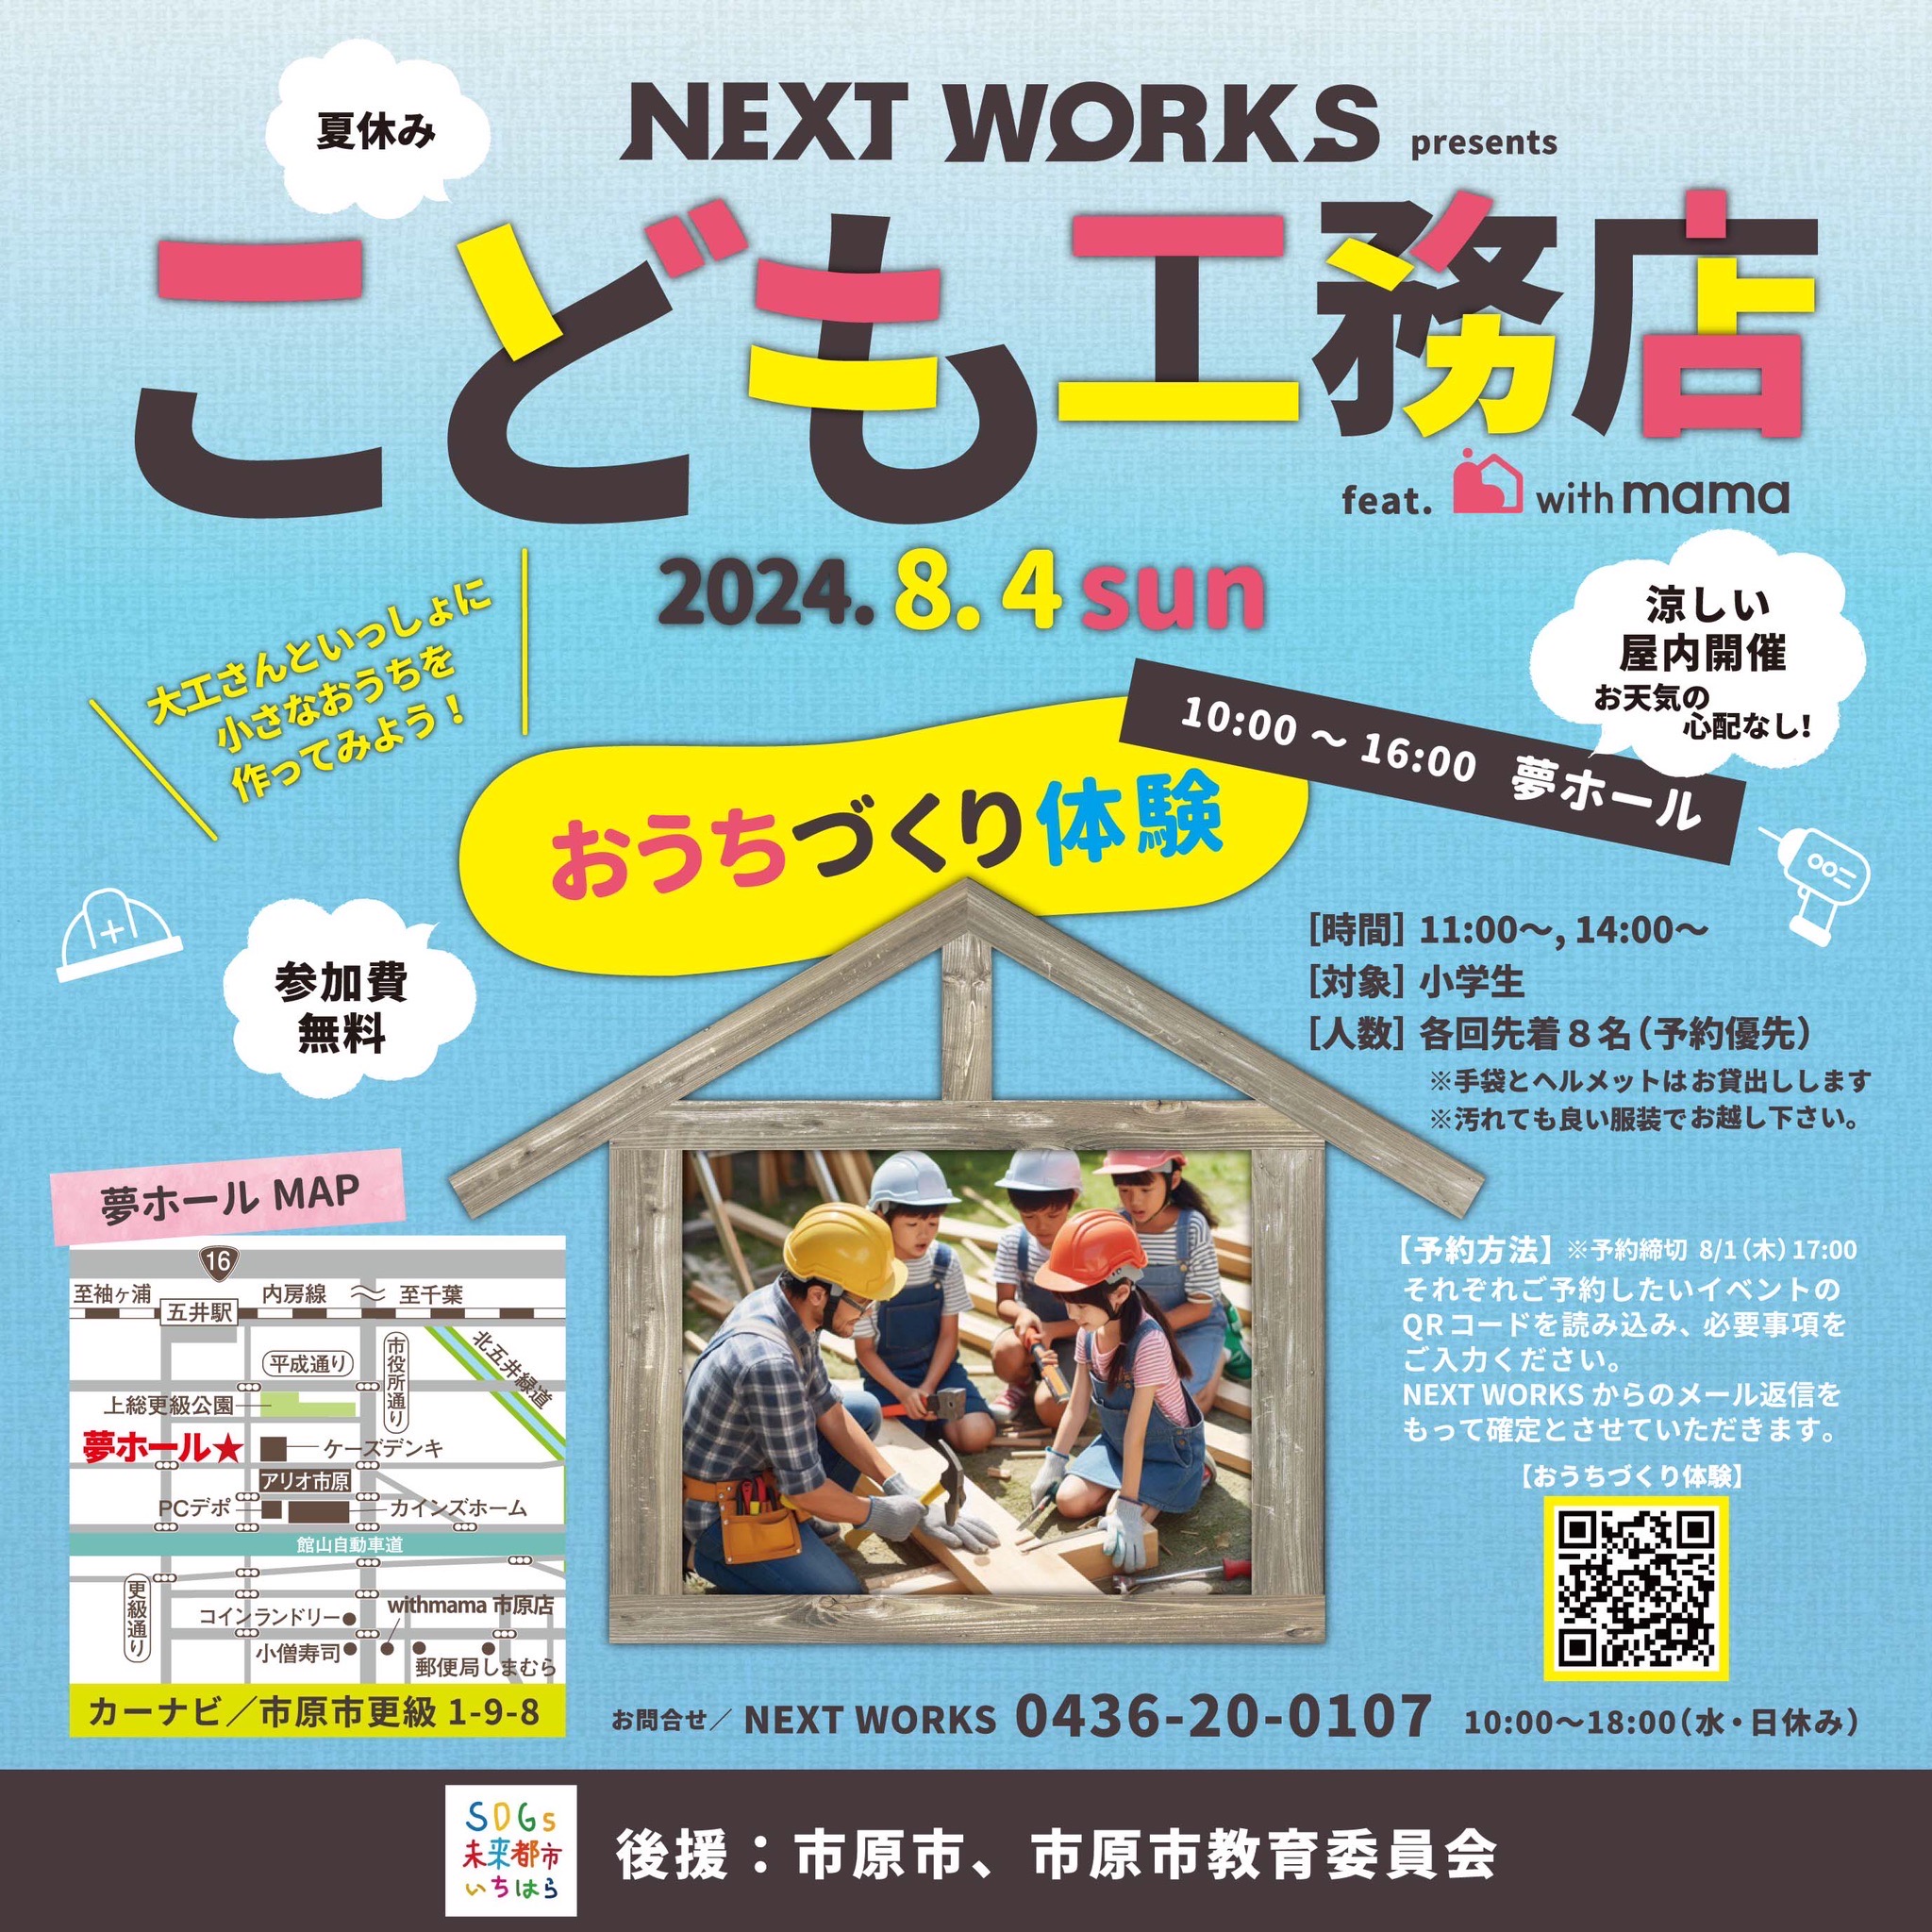 NEXT WORKS presents 『こども工務店』feat. with mama アイチャッチ